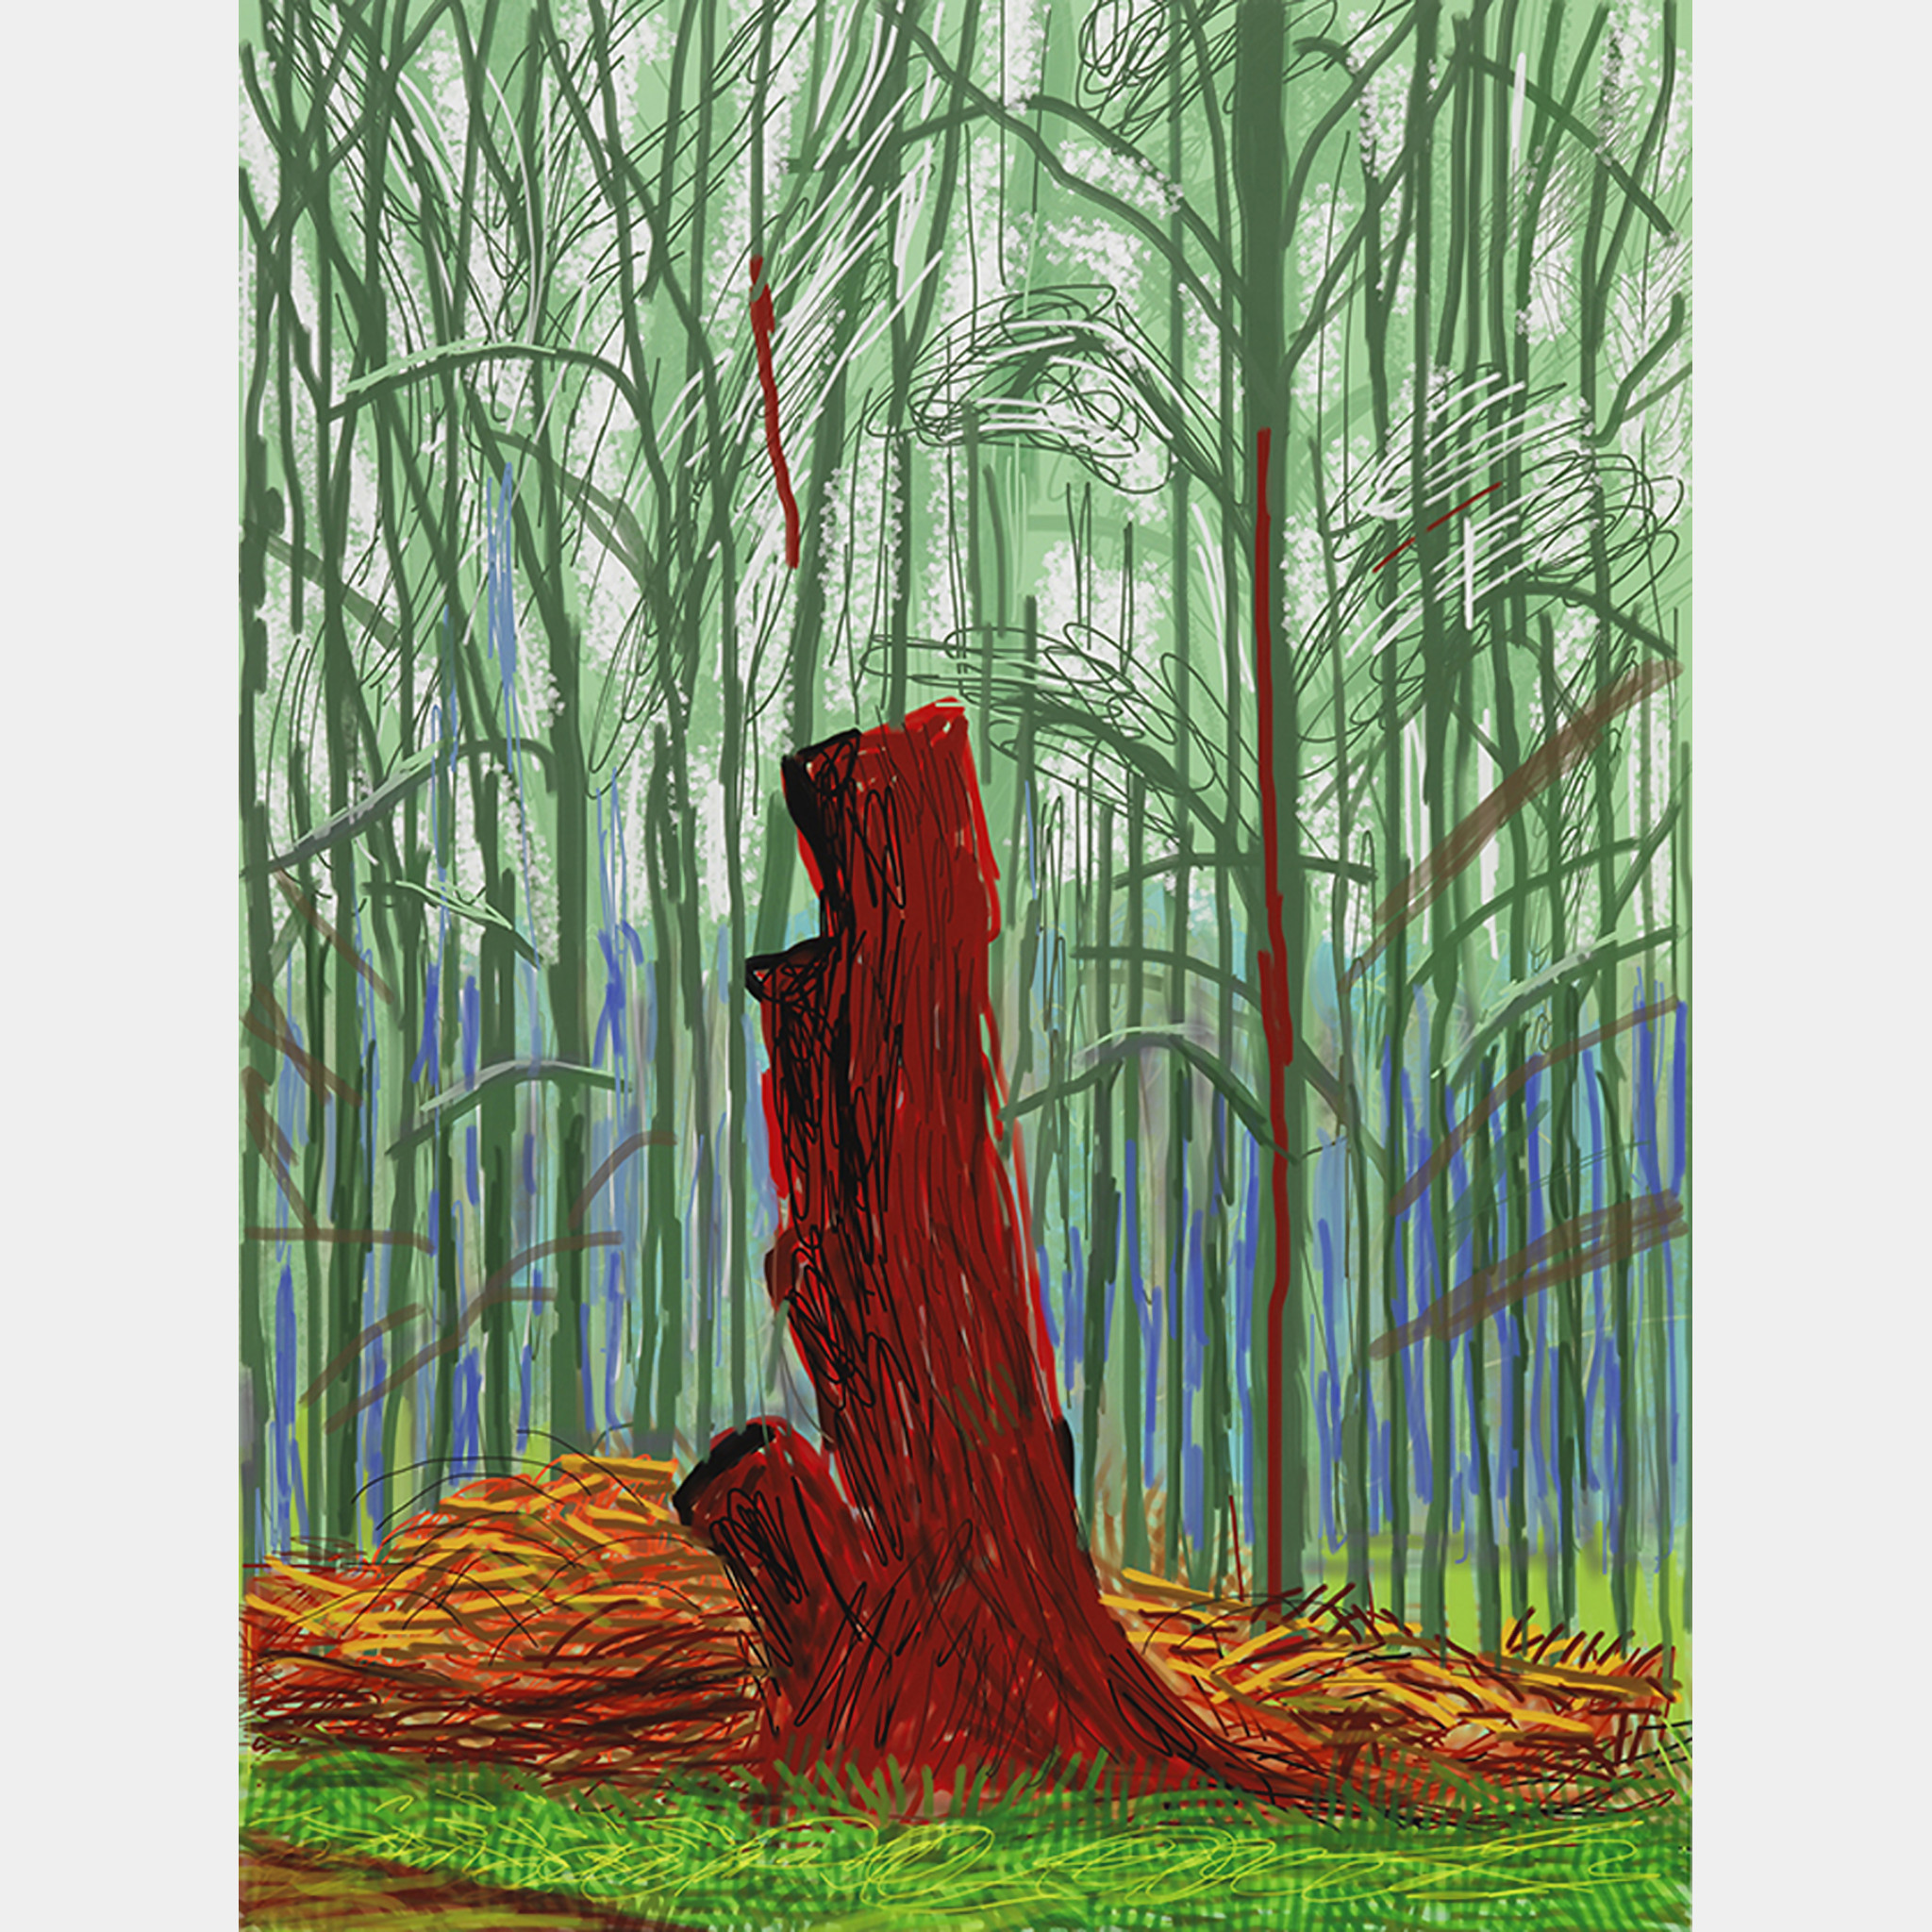 David Hockney, The Arrival of Spring in Woldgate, East Yorkshire in 2011 (twenty eleven),  25 February, 2011,  iPad drawing printed on paper.jpg